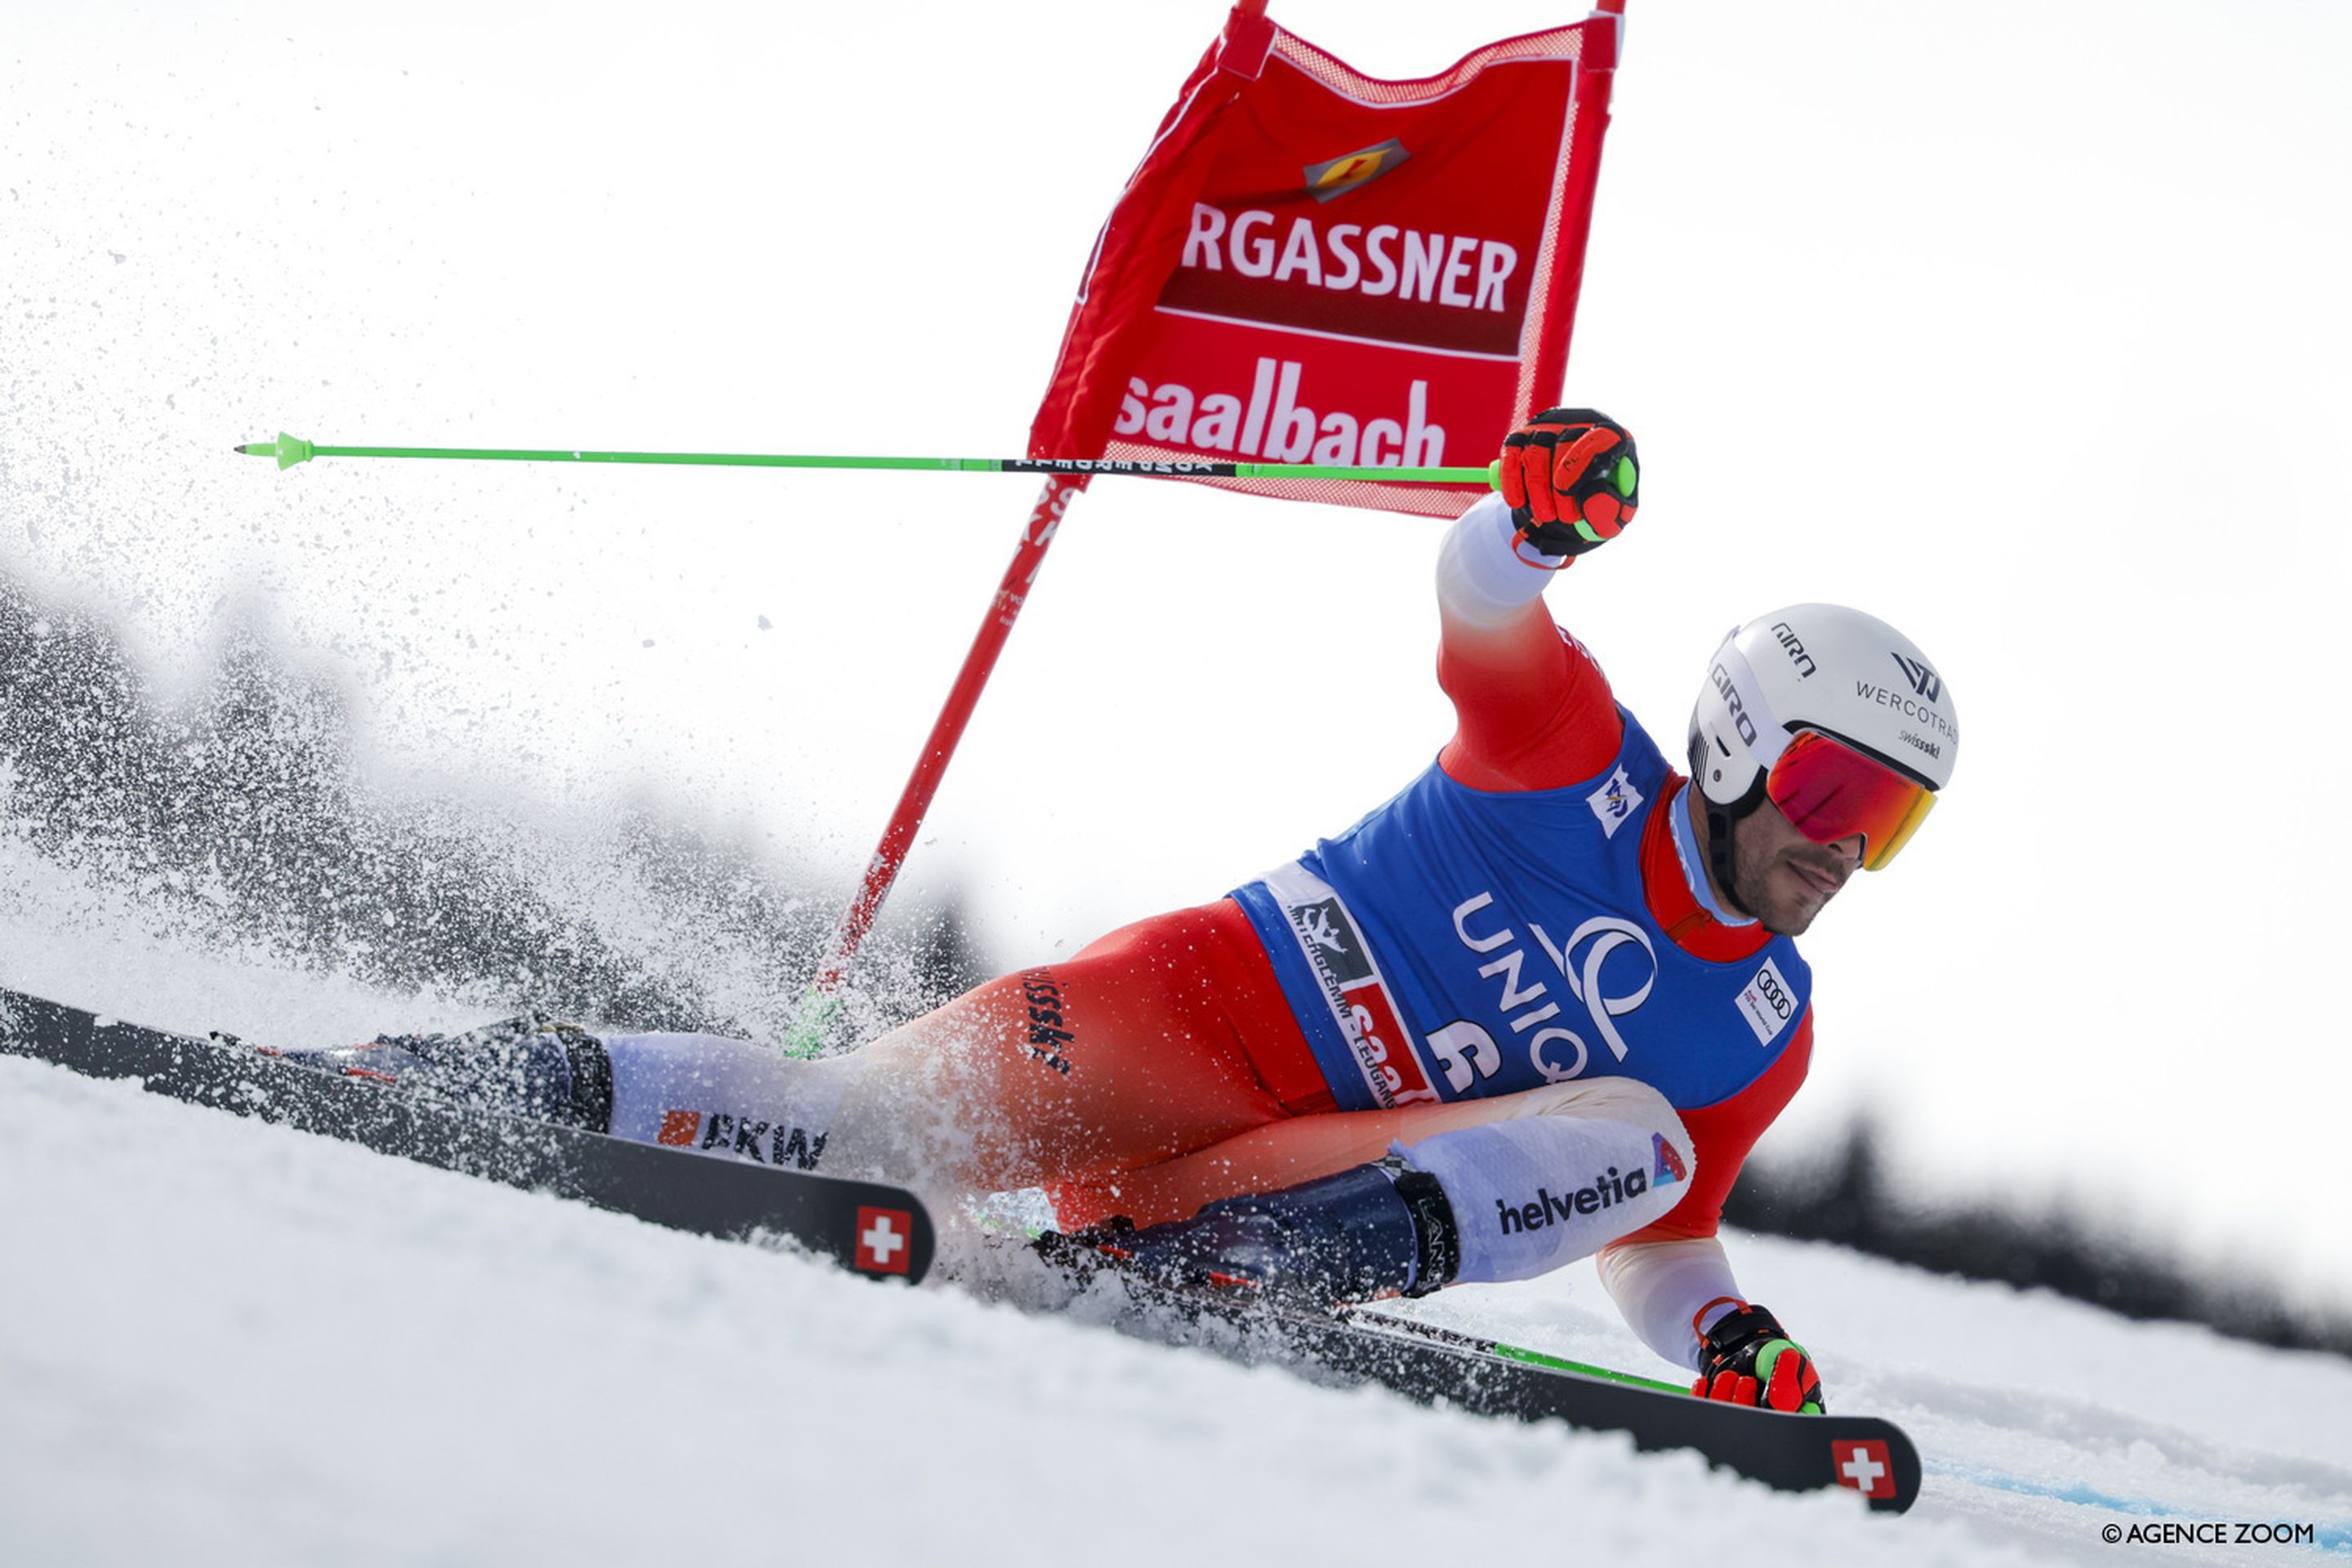 Thomas Tumler (SUI) reached his first giant slalom podium since 2018